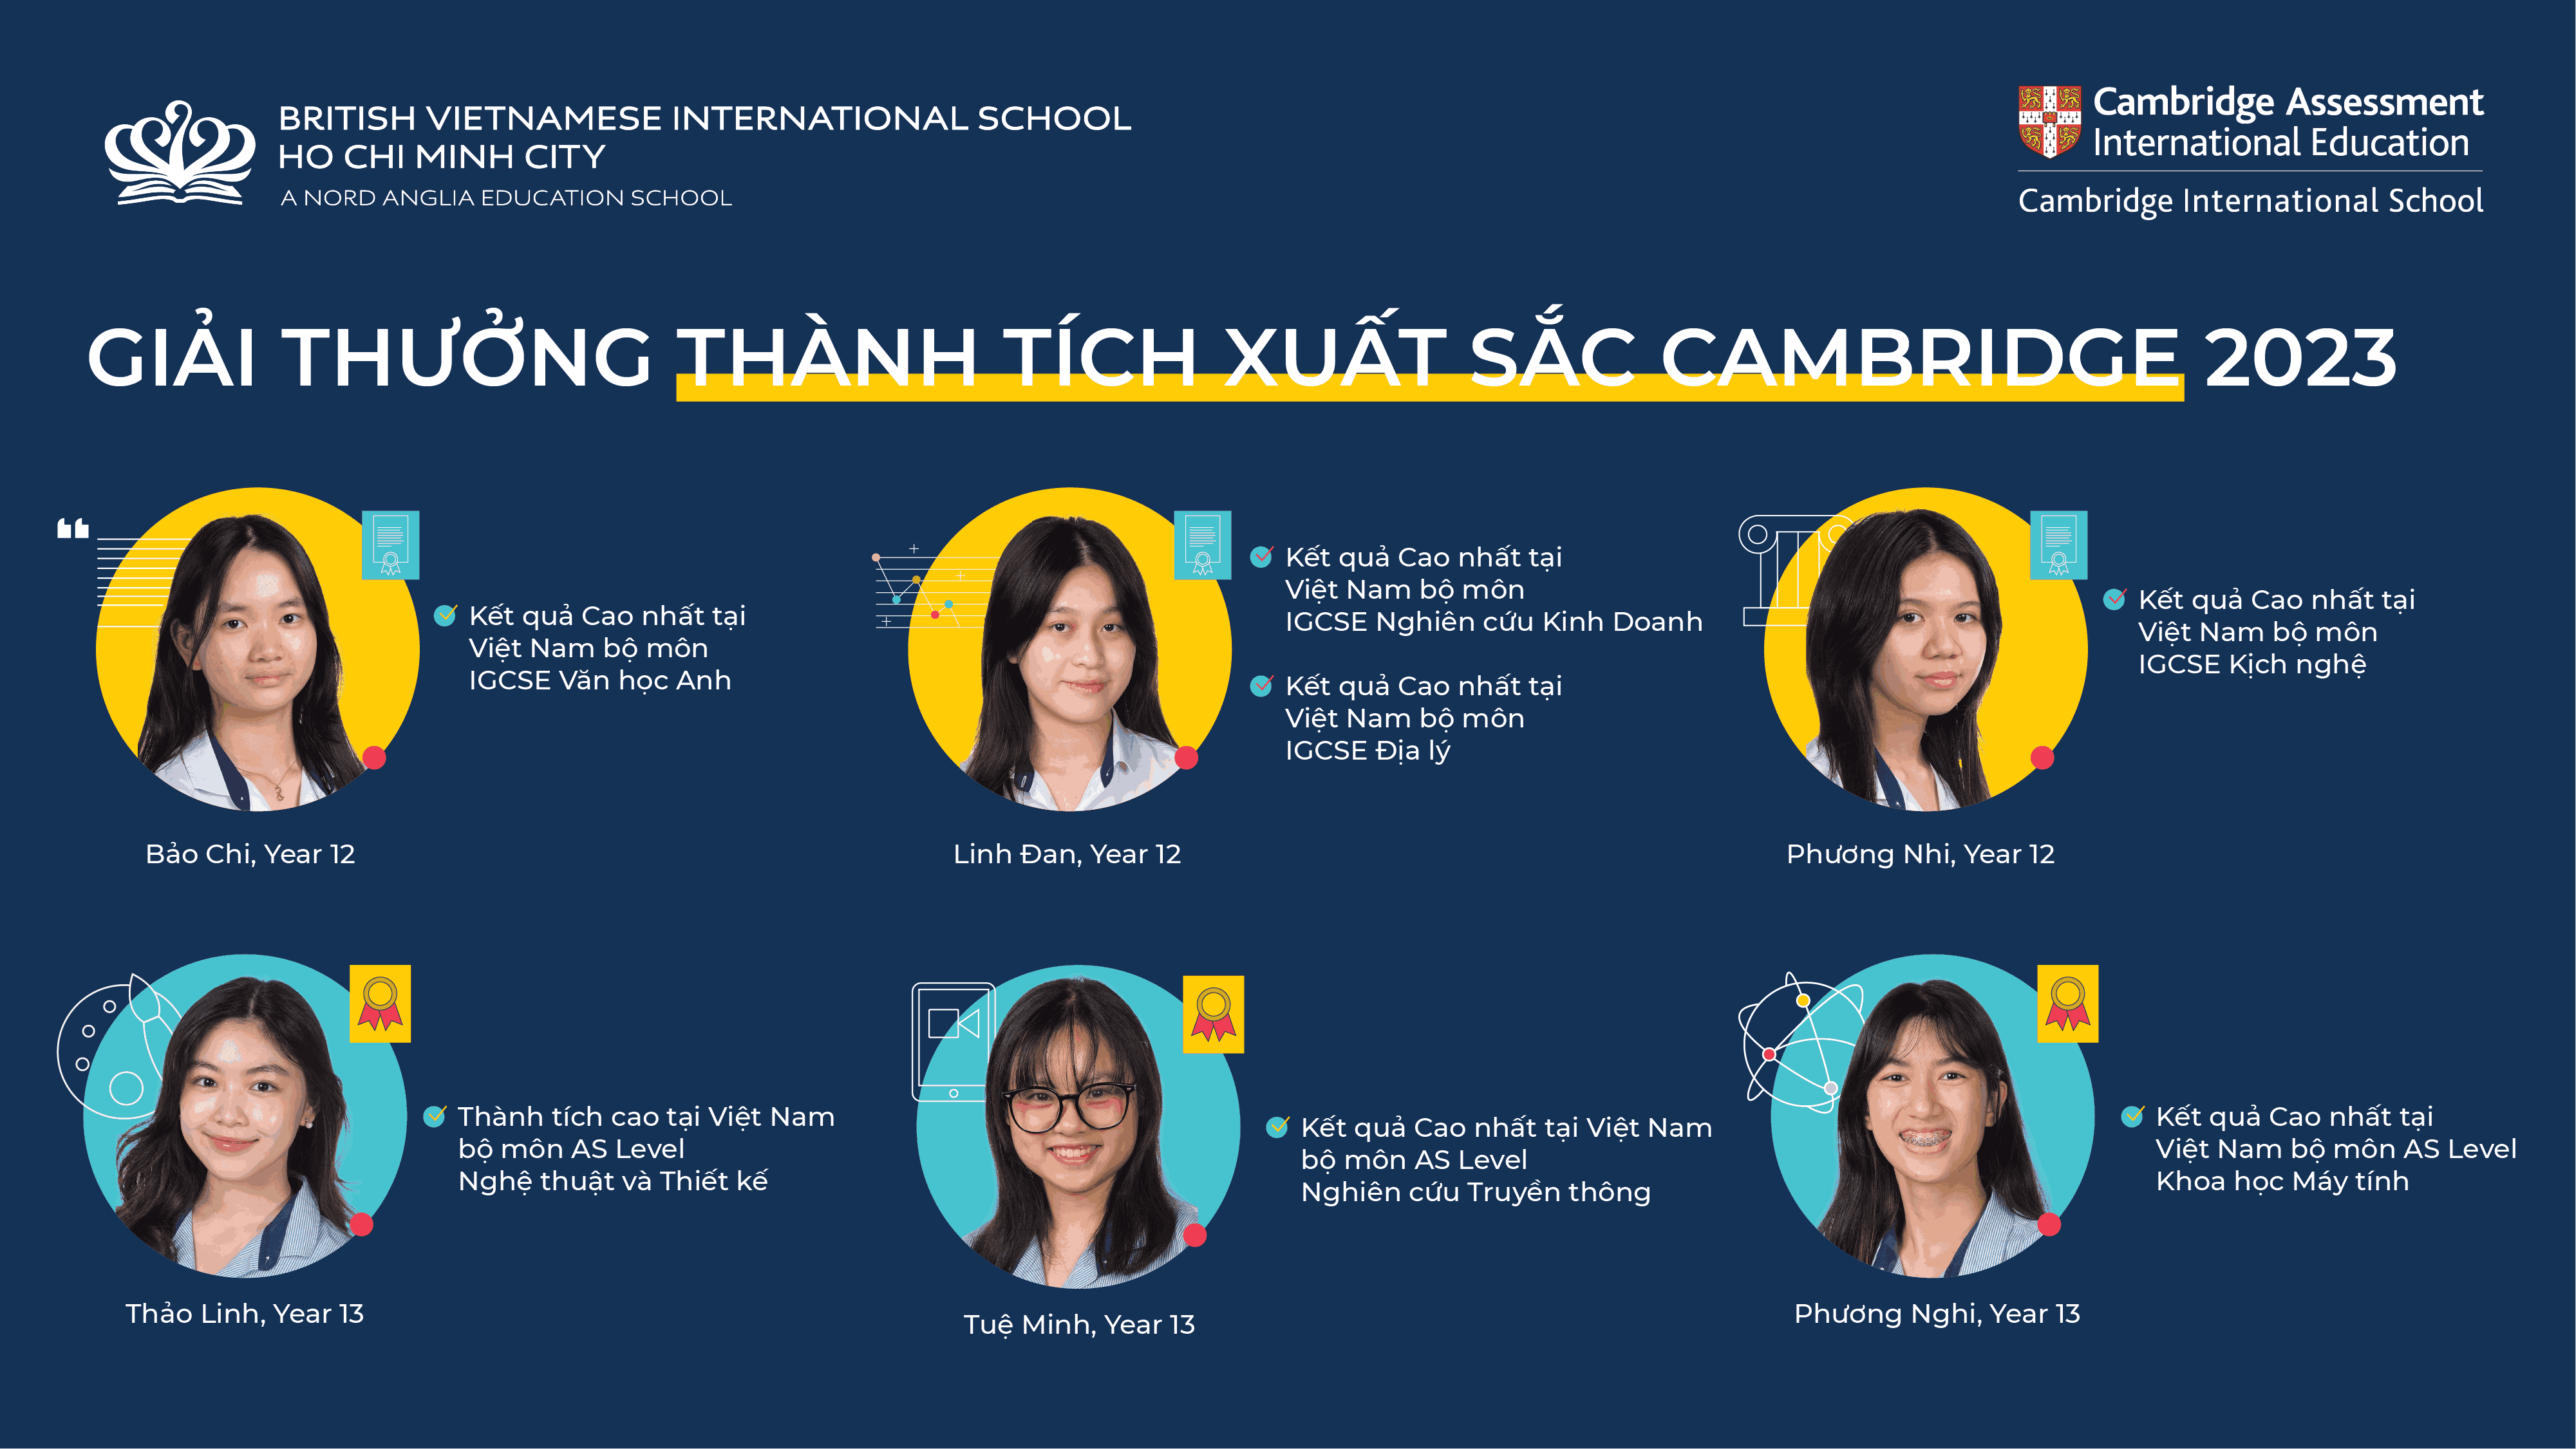 Học sinh BVIS đạt giải thưởng thành tích xuất sắc Cambridge 2023 với kết quả thi cao nhất Việt Nam!-BVIS students achieved the Outstanding Cambridge Learner Awards with the top in Vietnam results-CAIE 2023 (15)